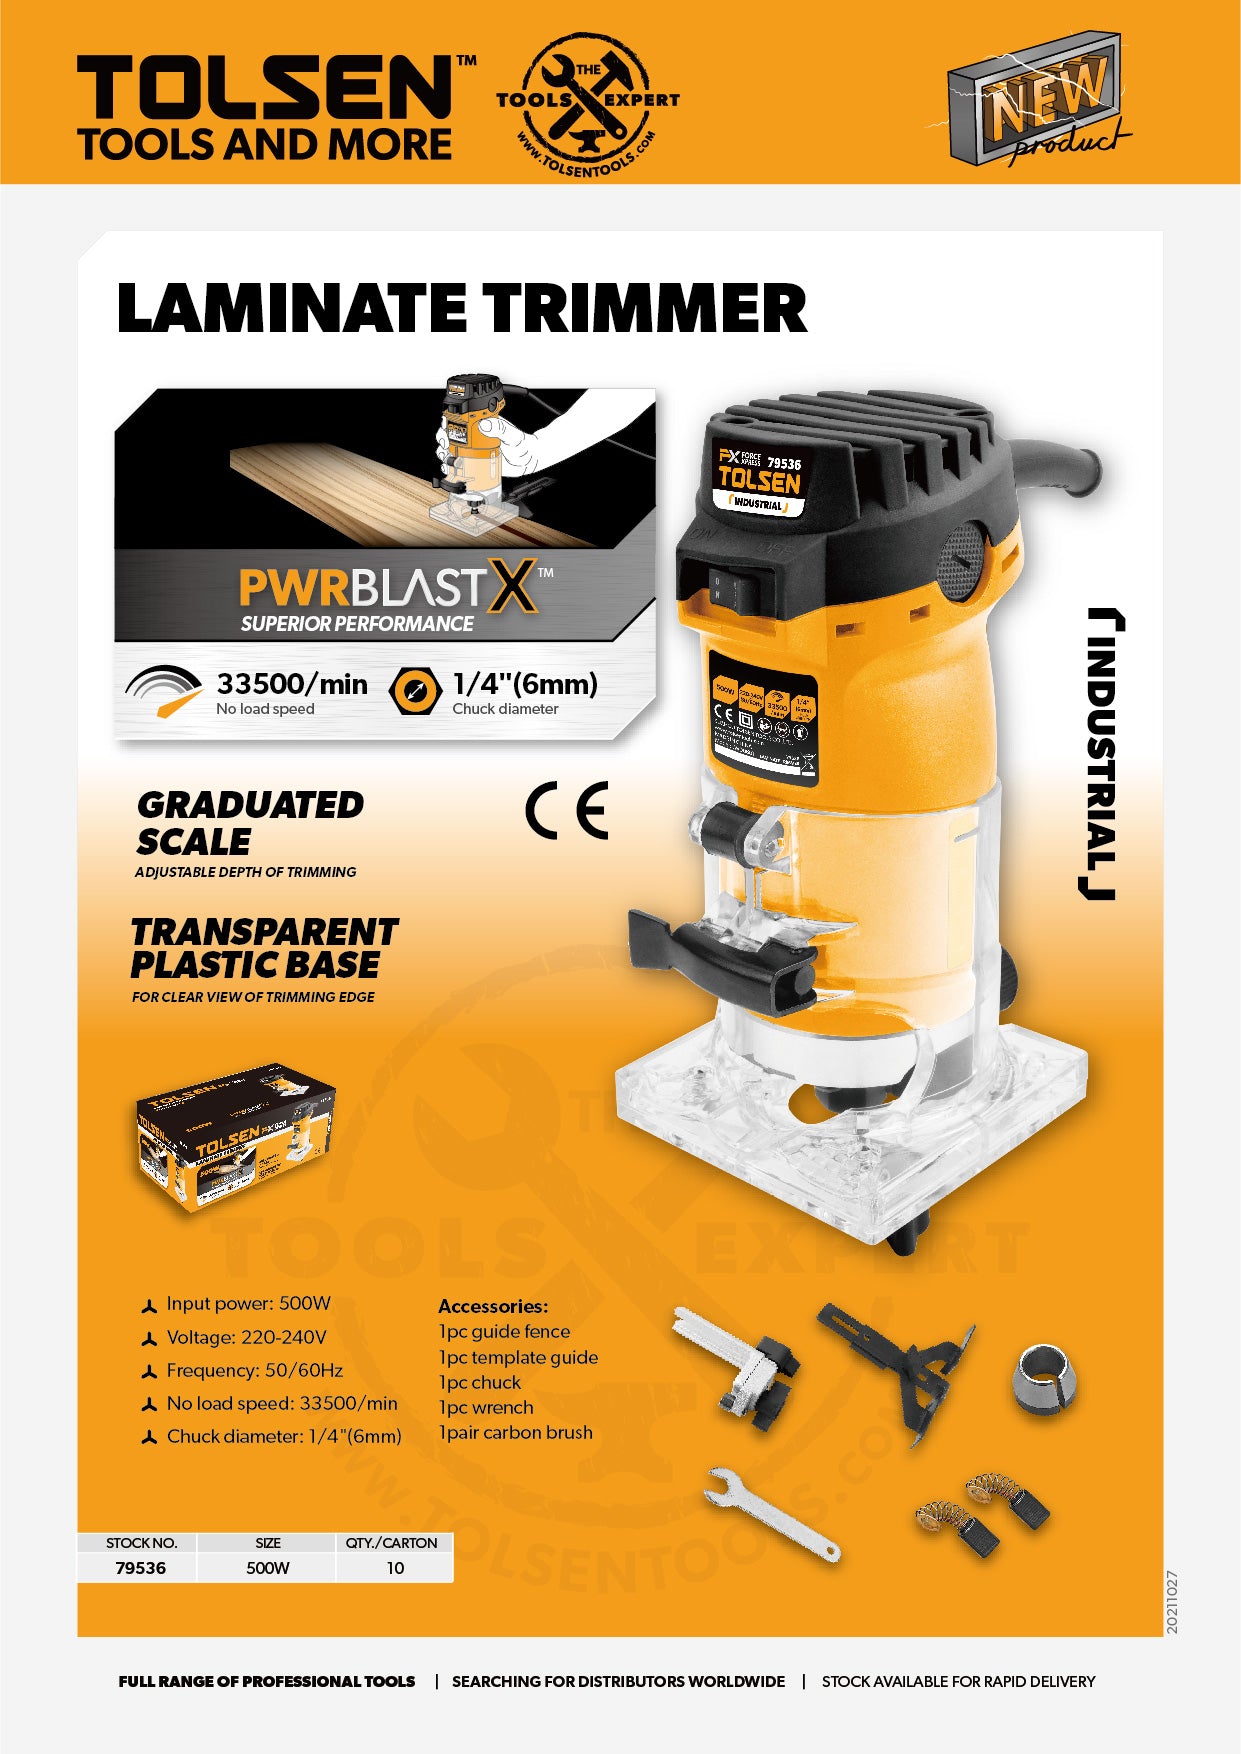 Industrial Electric Laminate Trimmer / Router (500 Wattts) PWRBLAST X